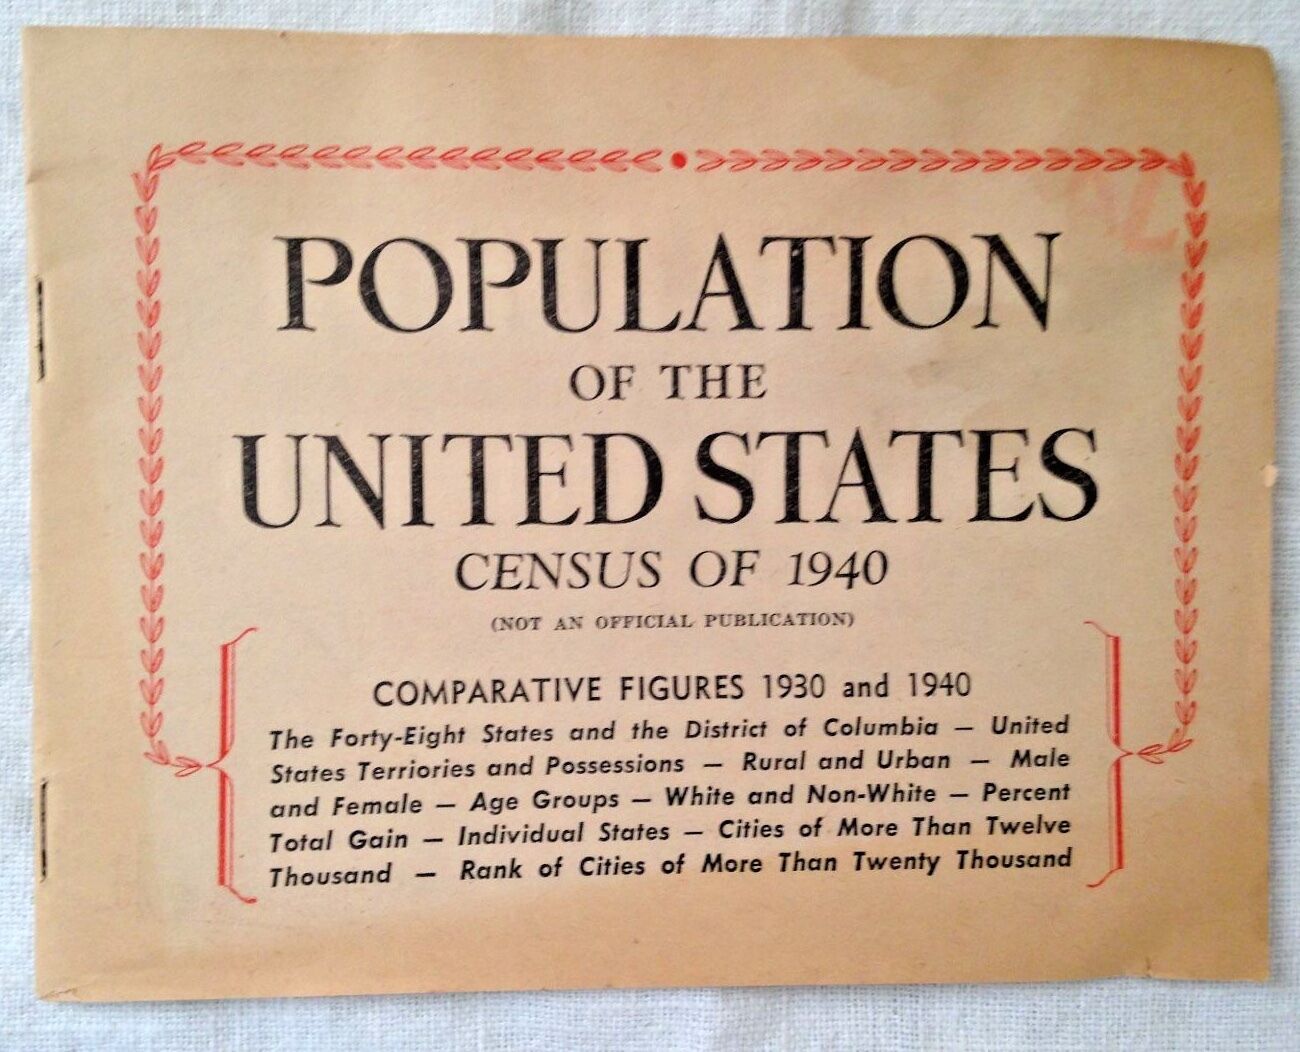 POPULATION OF THE UNITED STATES CENSUS 1940 - 4 3/4 X 6 +